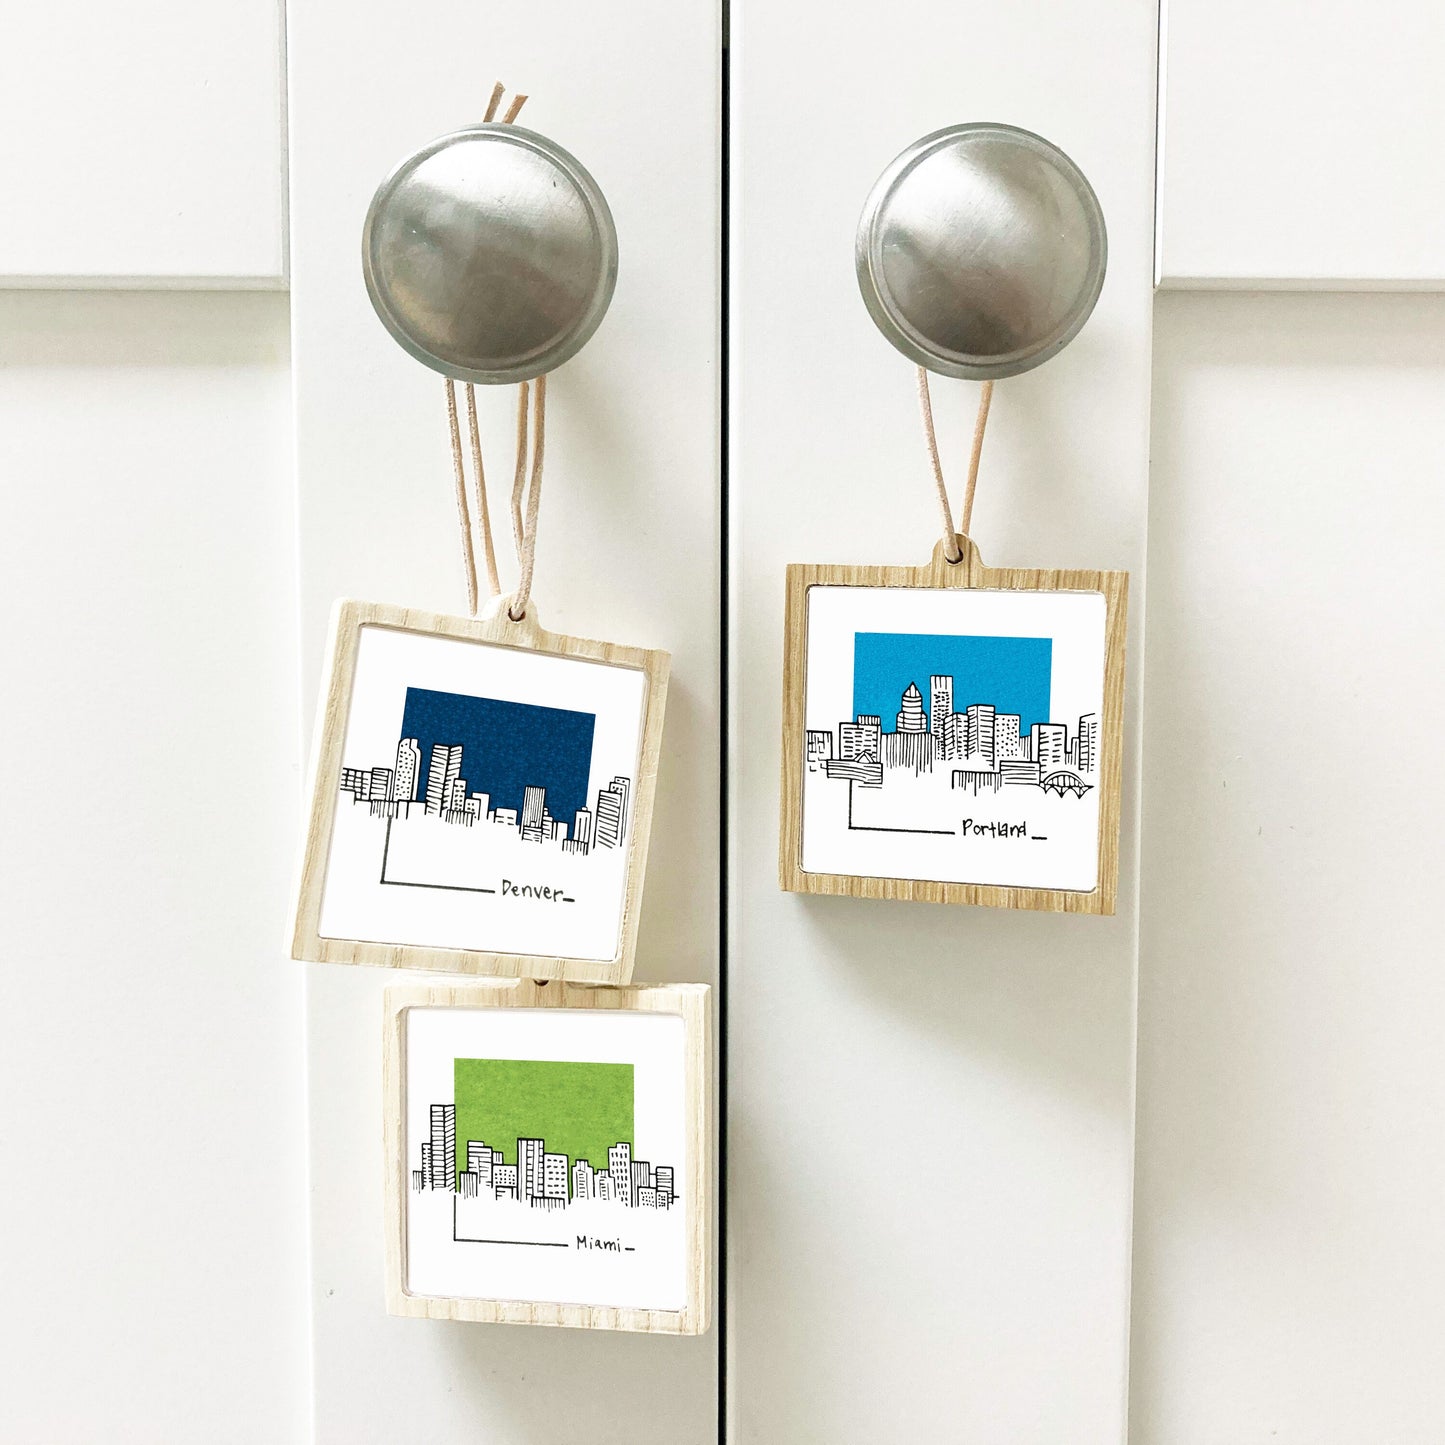 Mini Chicago, Illinois Skyline 1.5" Watercolor and Ink Art PRINT